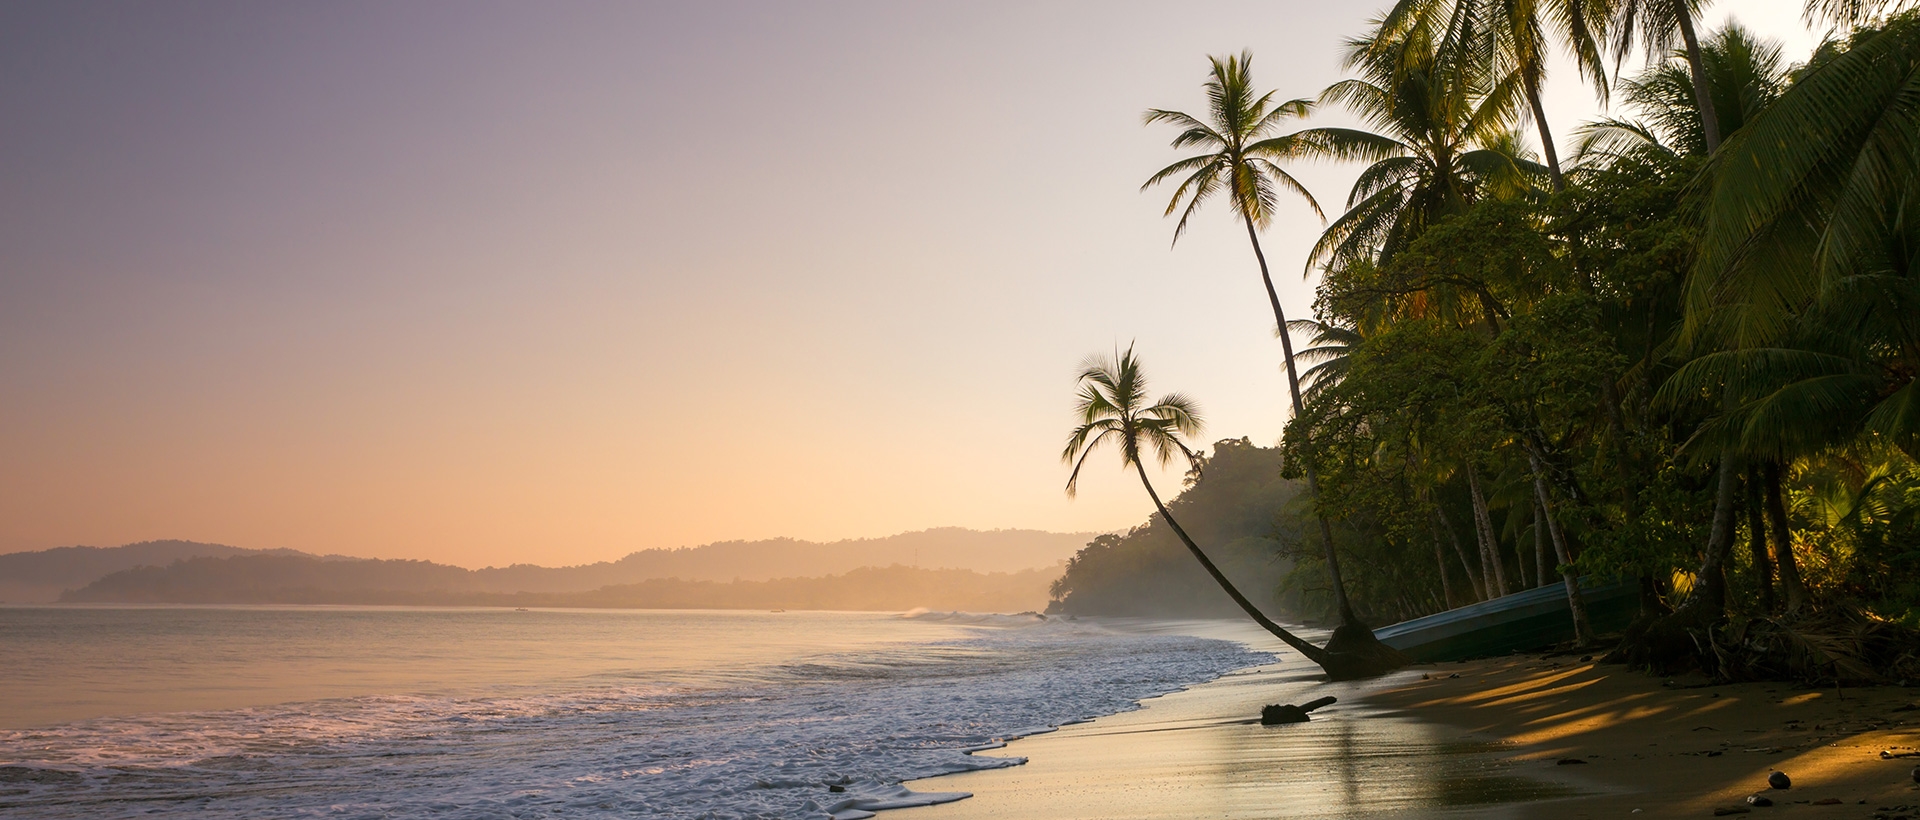  Plan your Costa Rica trip today